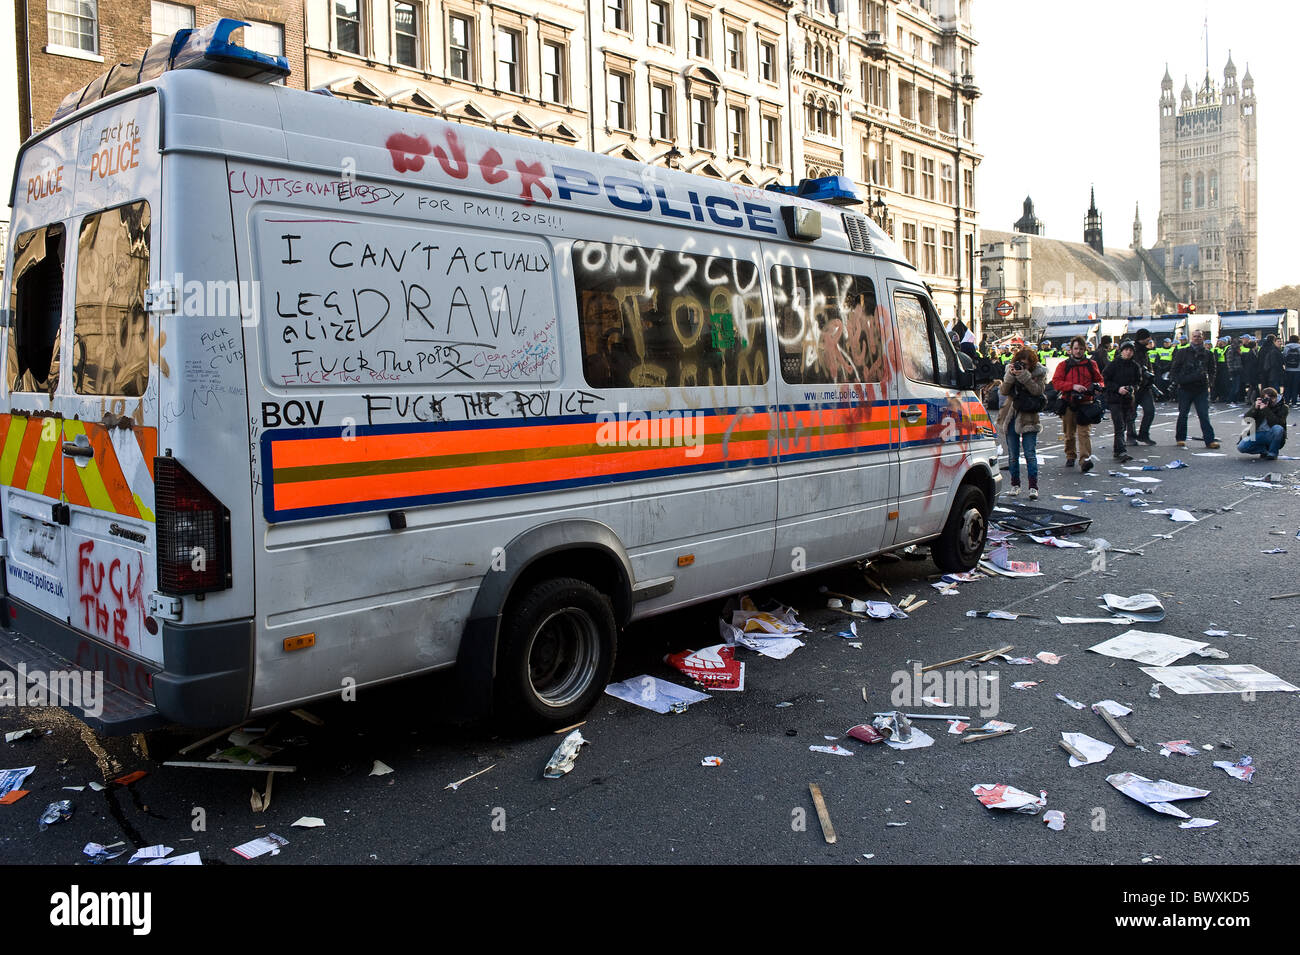 A wrecked and vandalised Metropolitan police vehicle at a demonstration in London. Stock Photo